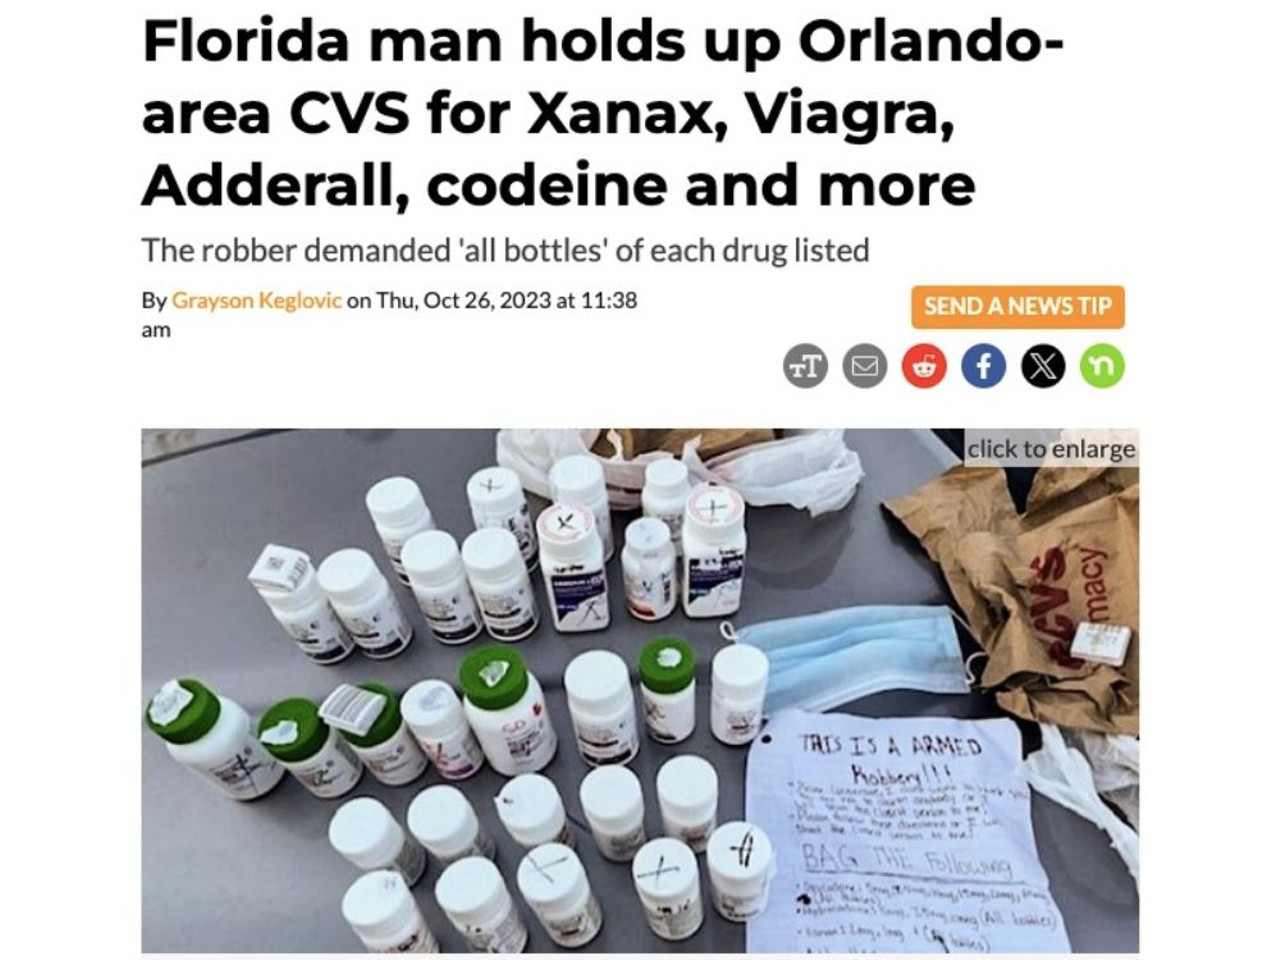 The alarming note titled “THIS IS A ARMED ROBBERY!!!” contained a laundry list of drugs that were to be handed over to Mues to avoid injury: Xanax, Viagra, oxycodone, hydrocodone, Adderall and liquid codeine. The note demanded "all bottles" on hand of each. Read full article
